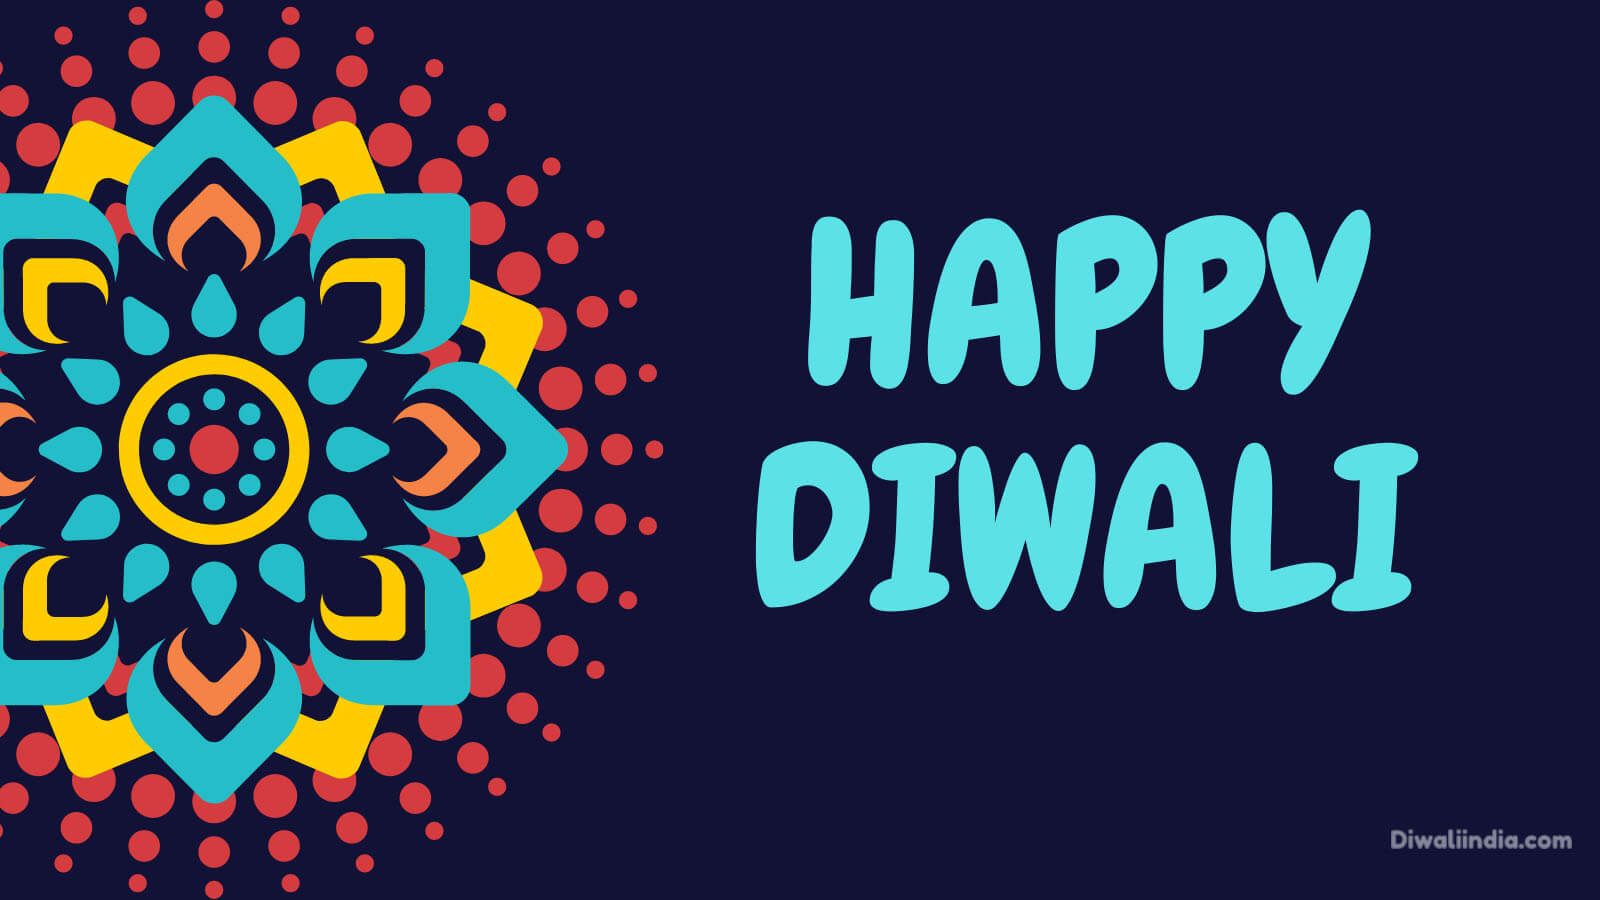 Happy Diwali 2021 Wishes Messages with Image for Friends & Family